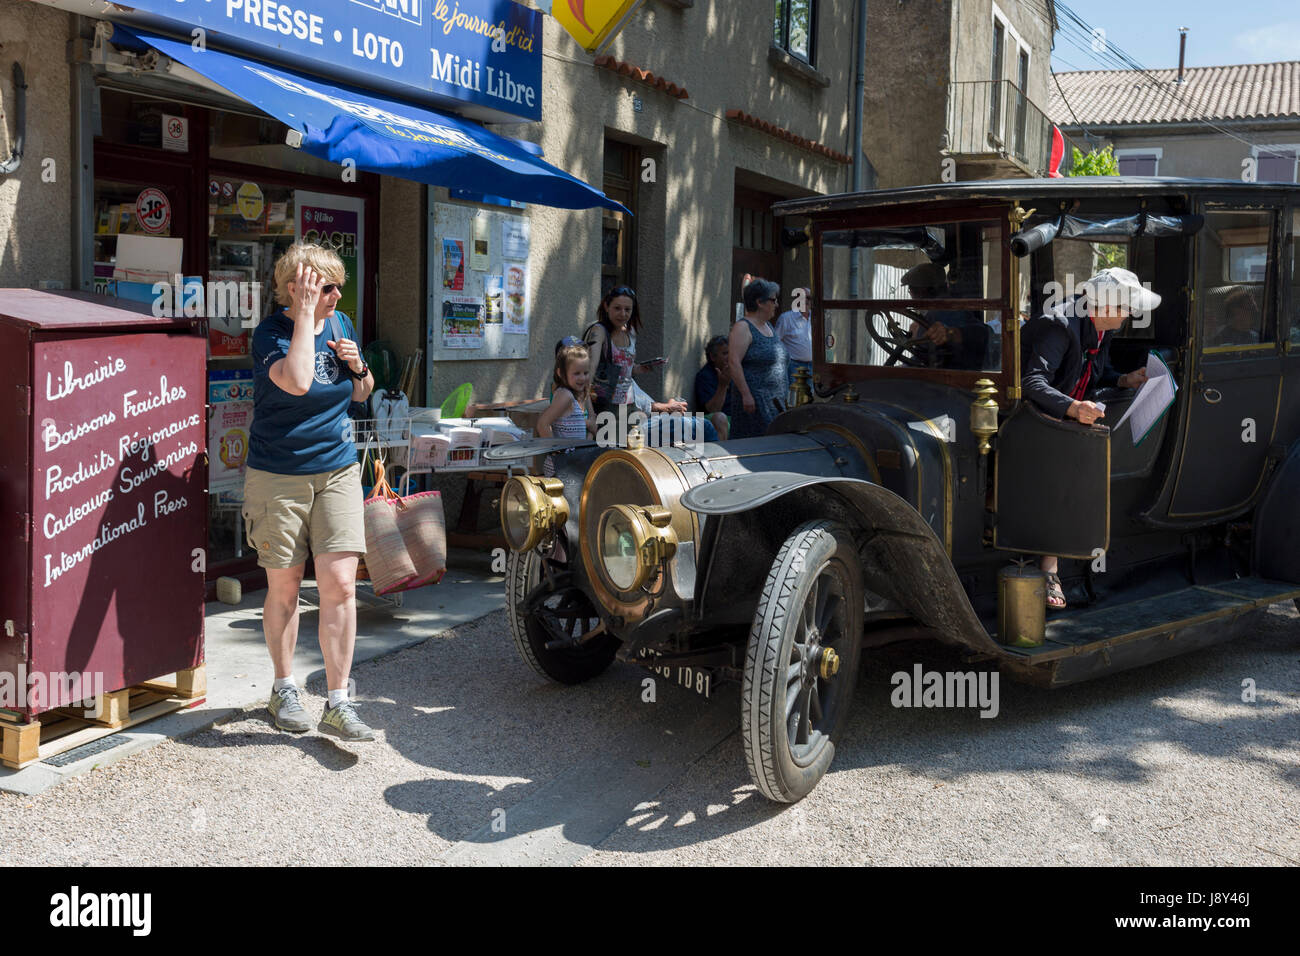 A visiting 1912 Delauney Belleville vintage car visits a French village, during a three-day rally journey through the Corbieres wine region, on 26th May, 2017, in Lagrasse, Languedoc-Rousillon, south of France. Lagrasse is listed as one of France's most beautiful villages and lies on the famous Route 20 wine route in the Basses-Corbieres region dating to the 13th century. Stock Photo